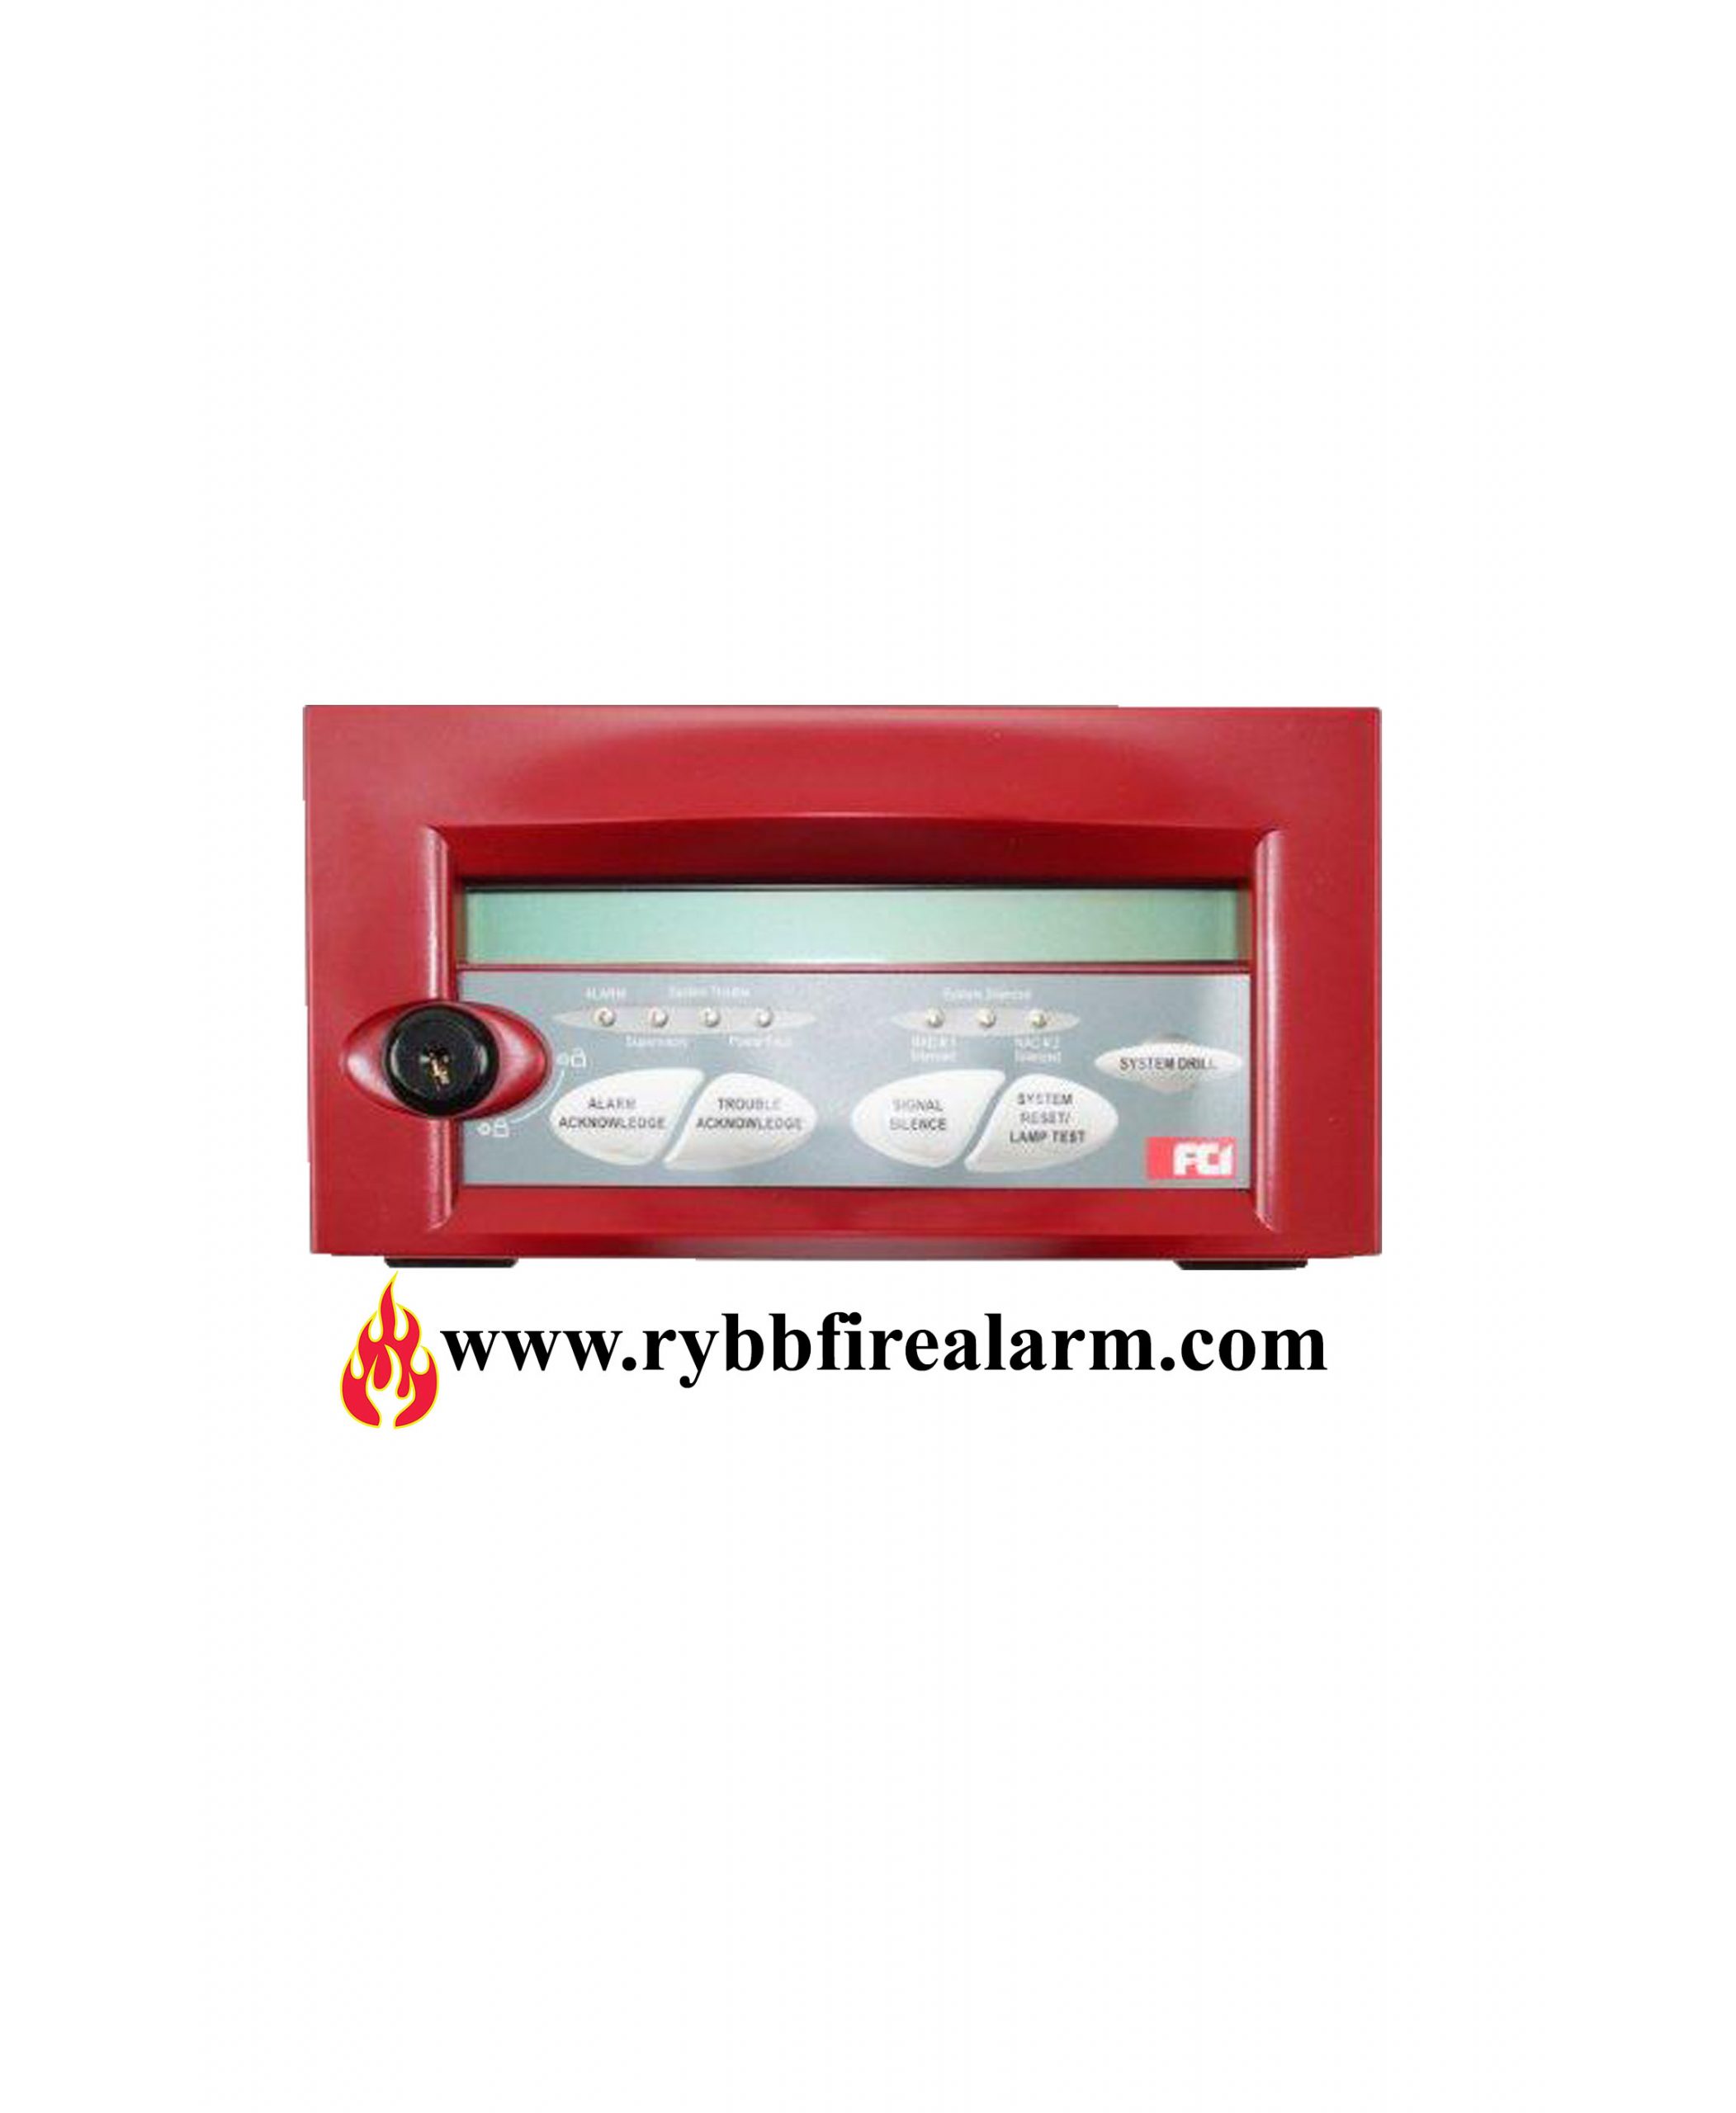 Gamewell Fci Lcd 7100 Fire Alarm Annunciator Rybb Fire Alarm Parts Service Repairs